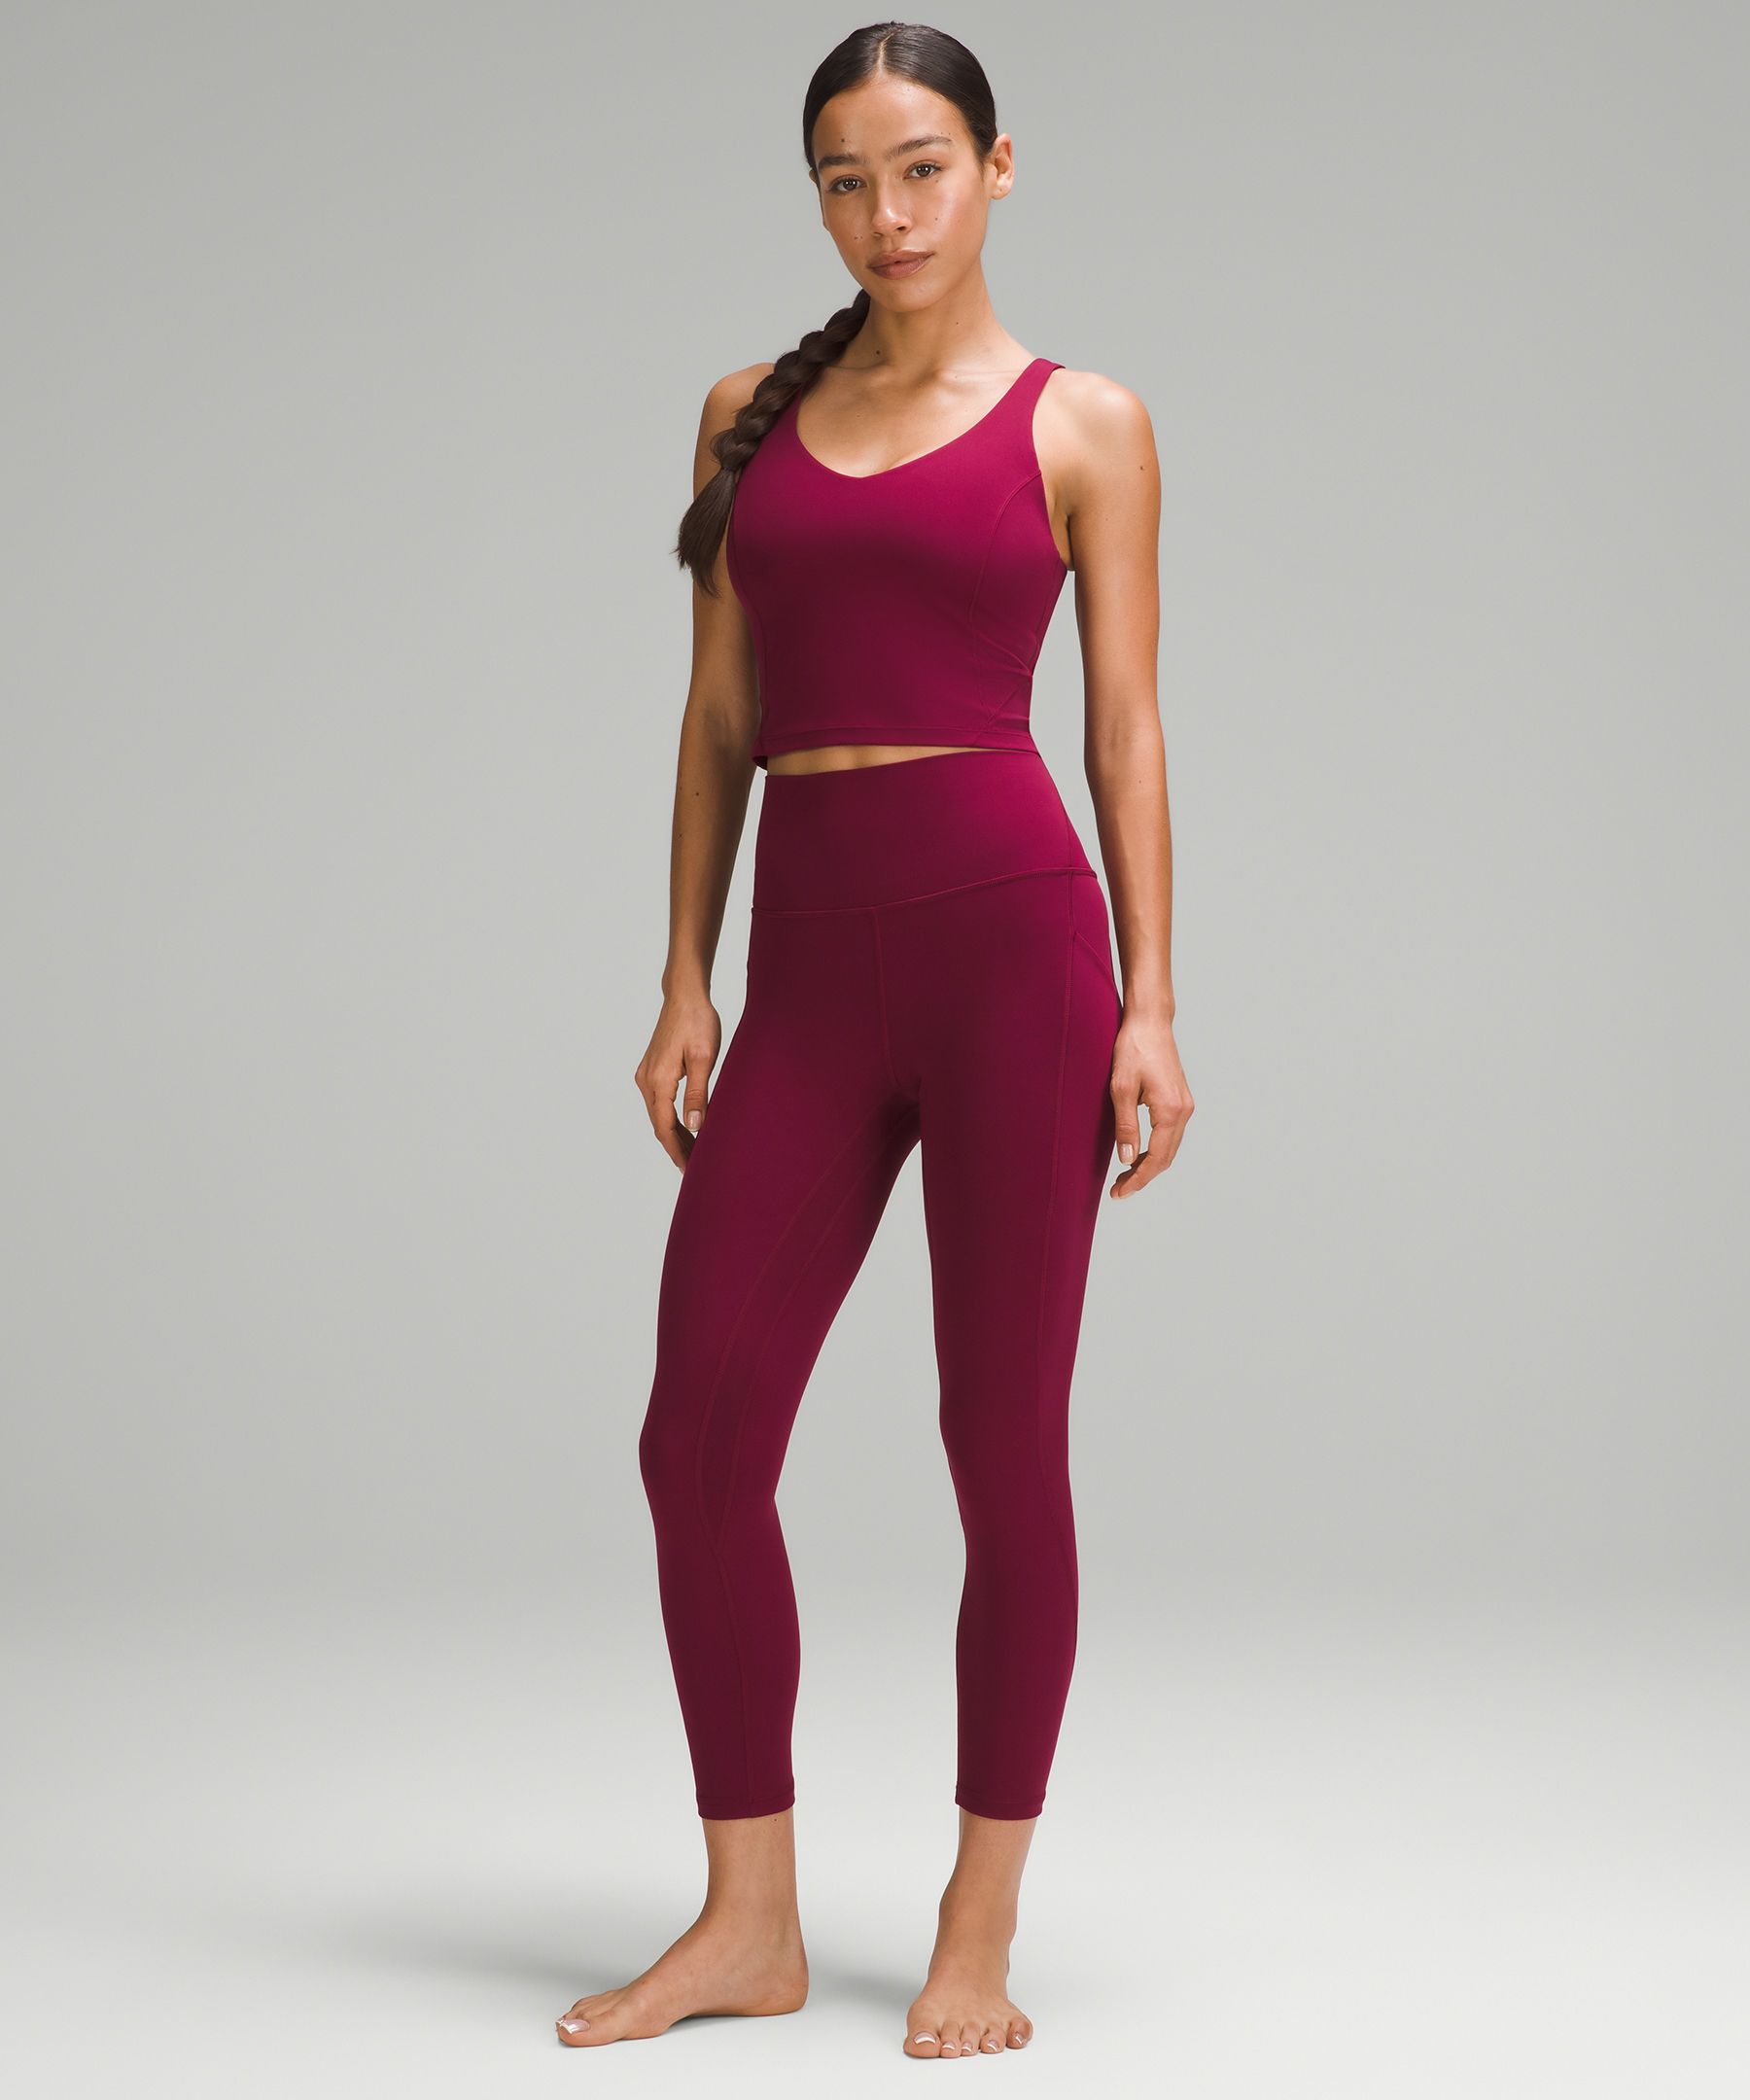 Lululemon Sonic Pink Align Tank Size 6 - $36 (47% Off Retail) - From Nicole